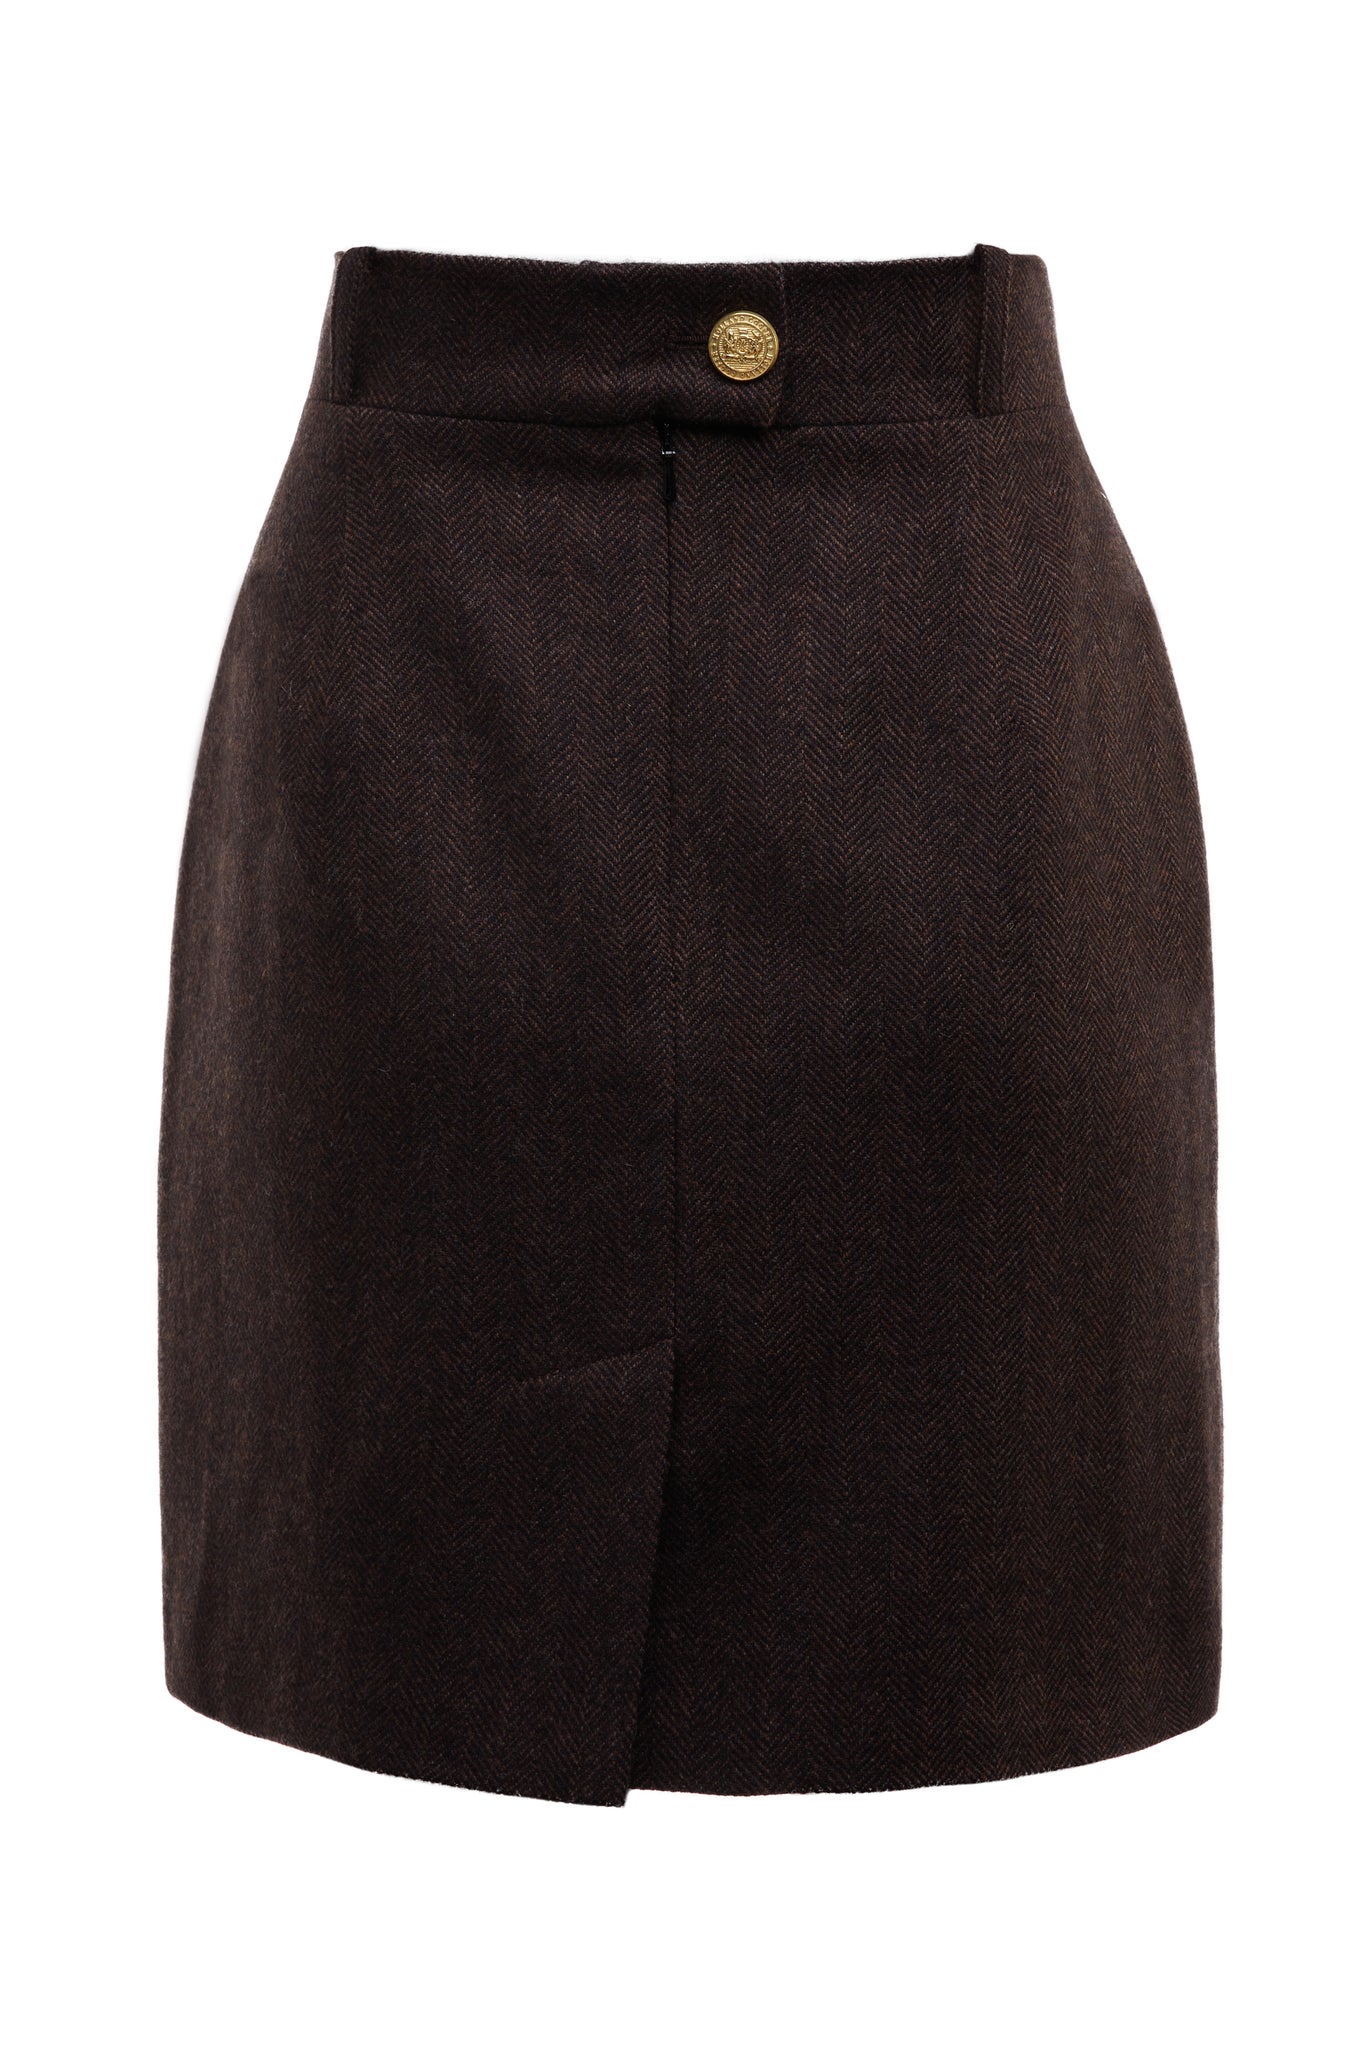 back of womens brown wool pencil mini skirt with concealed zip fastening on centre back with gold hc button above zip